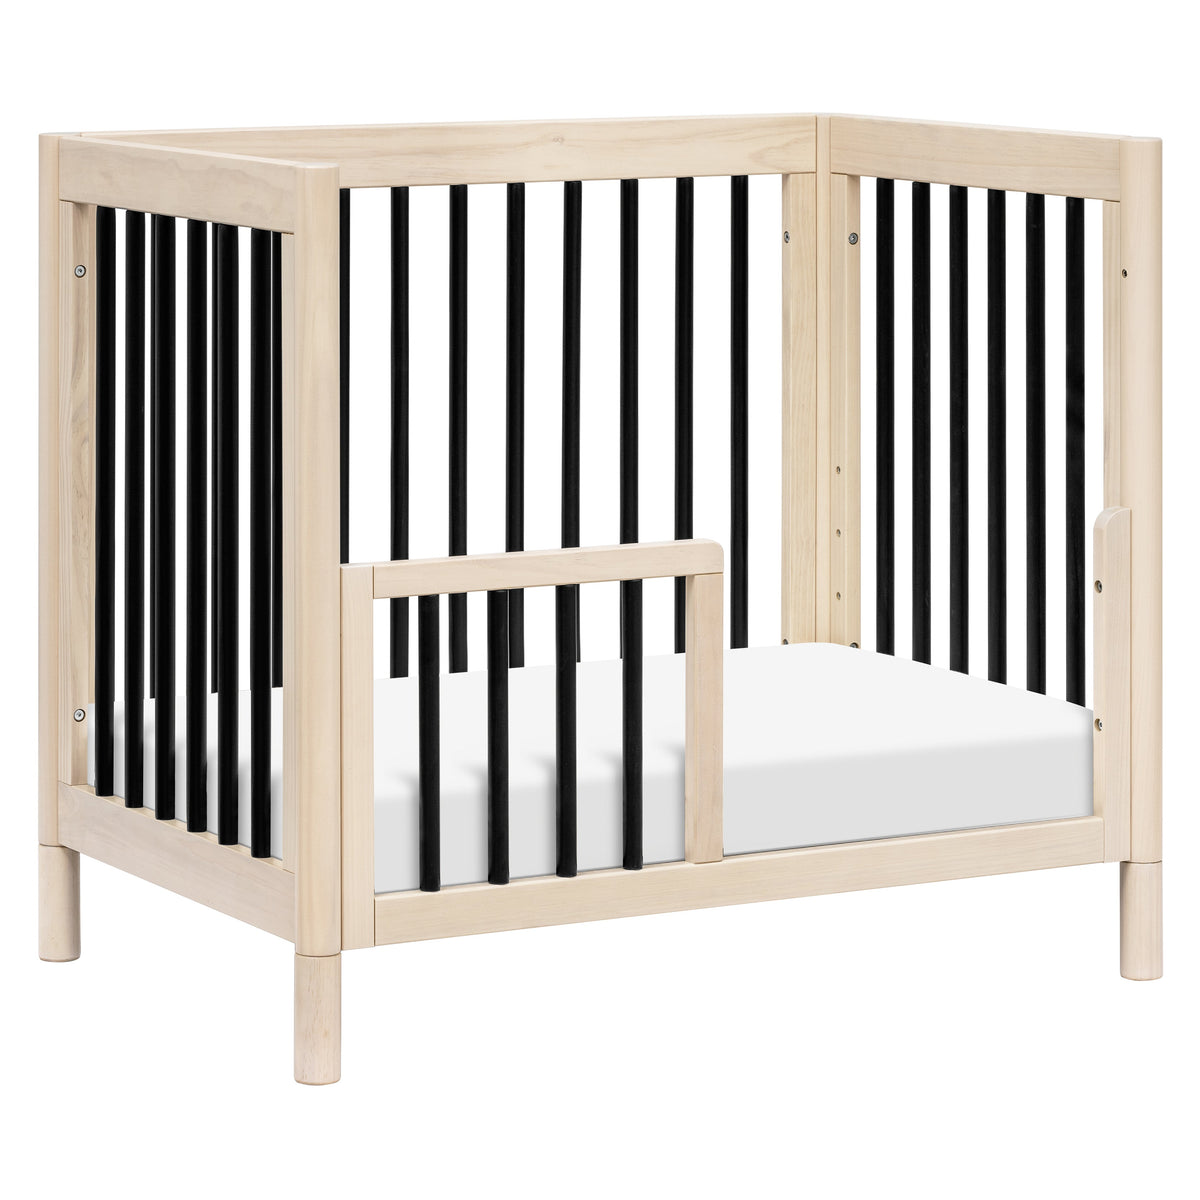 Gelato 4-in-1 Convertible Mini Crib - Washed Natural + Black - Project Nursery